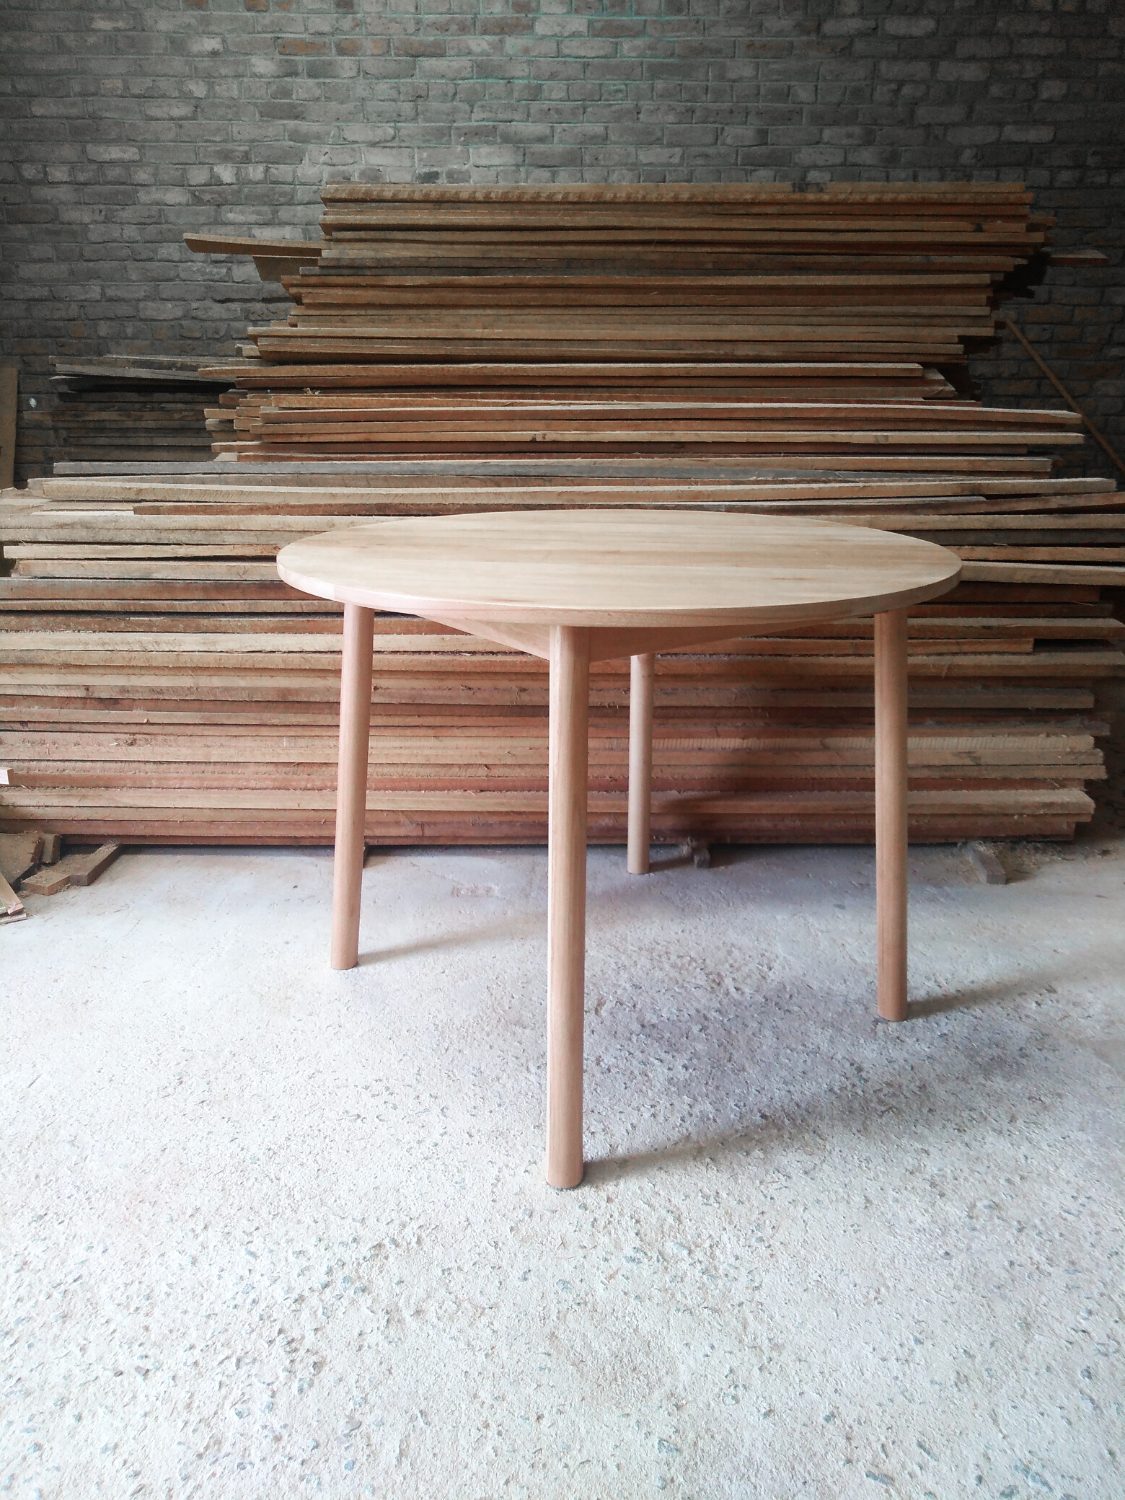 Pale wooden table with a round top and round section legs with a stack of timber in the background.